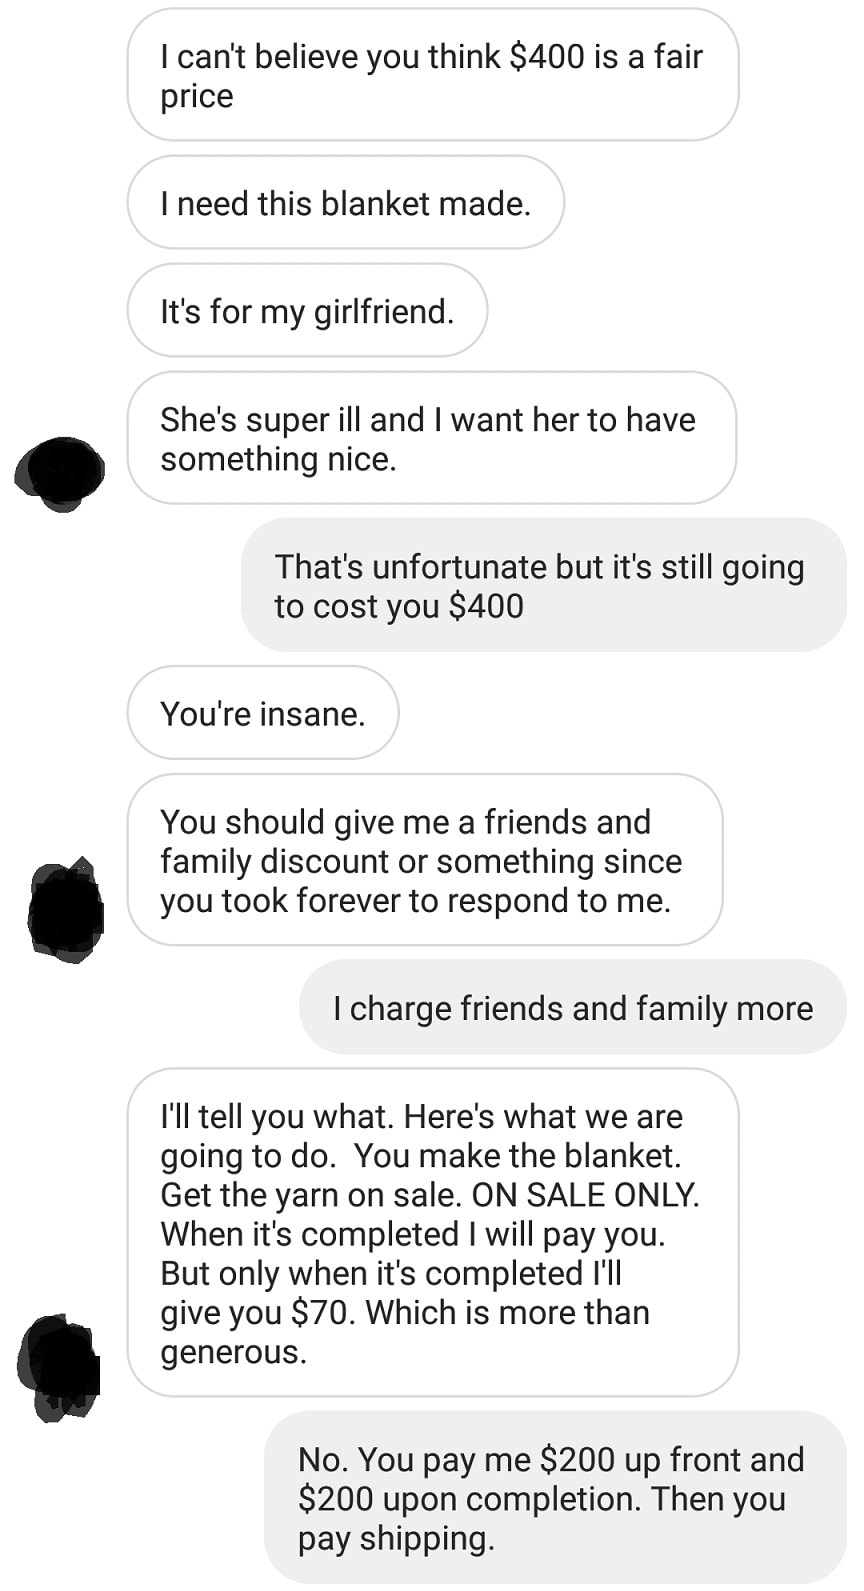 Abusive Messages from Jerk Who Wanted Crocheter To Work For Nothing